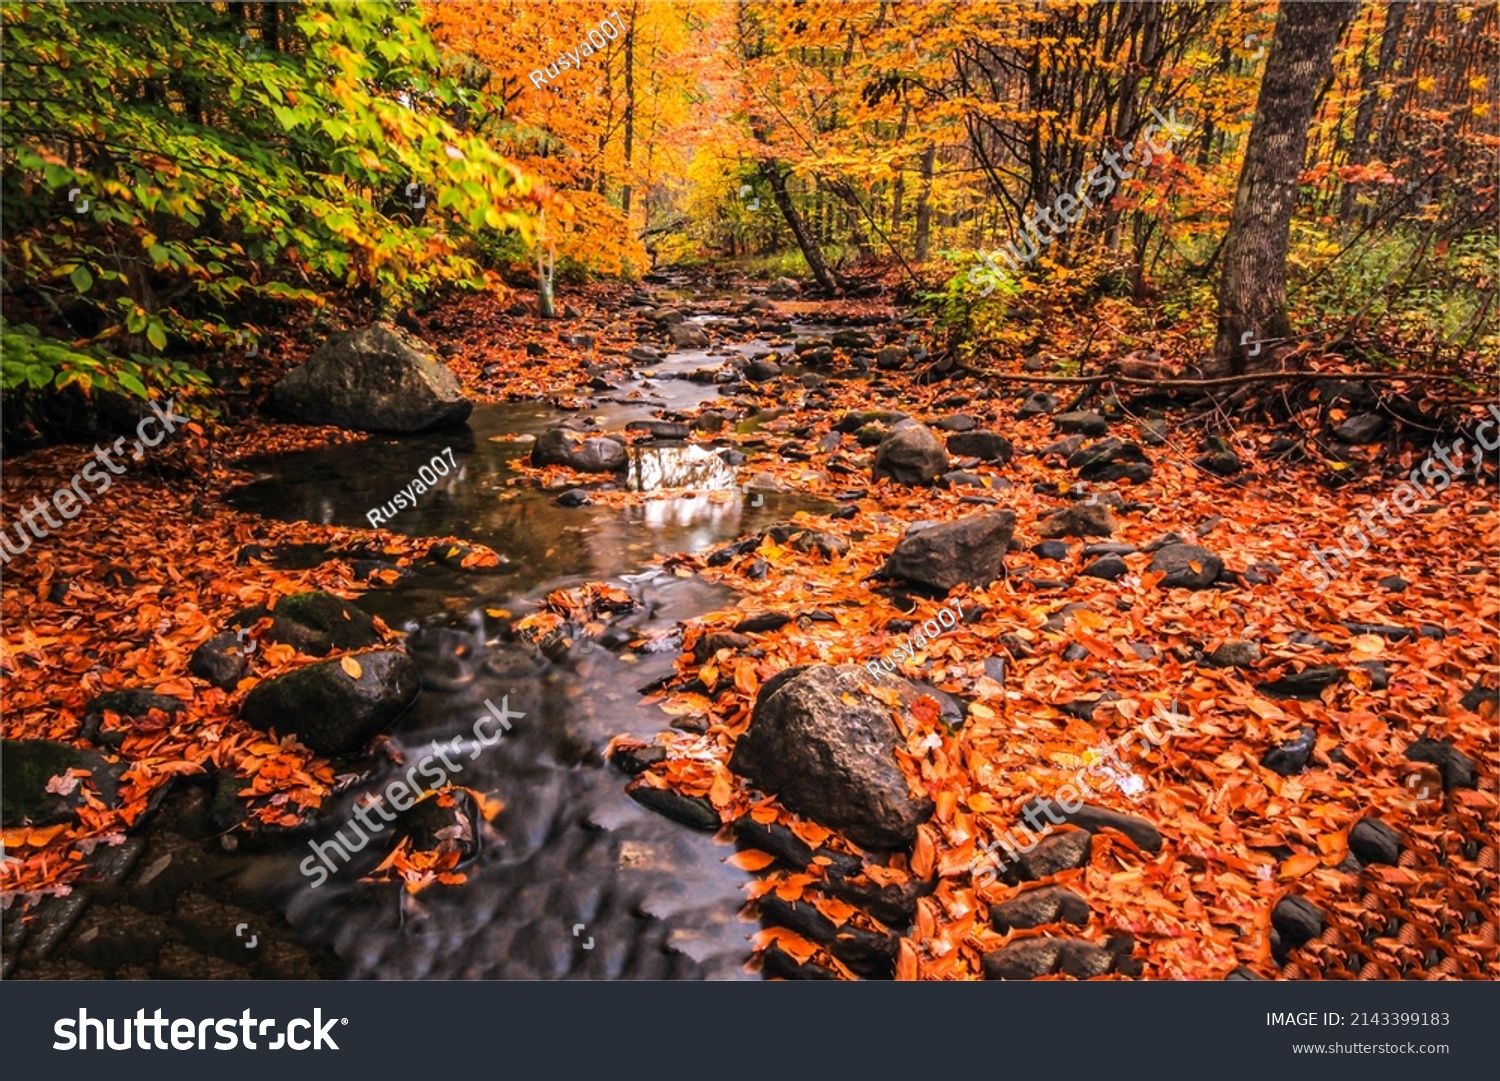 Autumn leaves along a forest stream rivers in fall season #2143399183